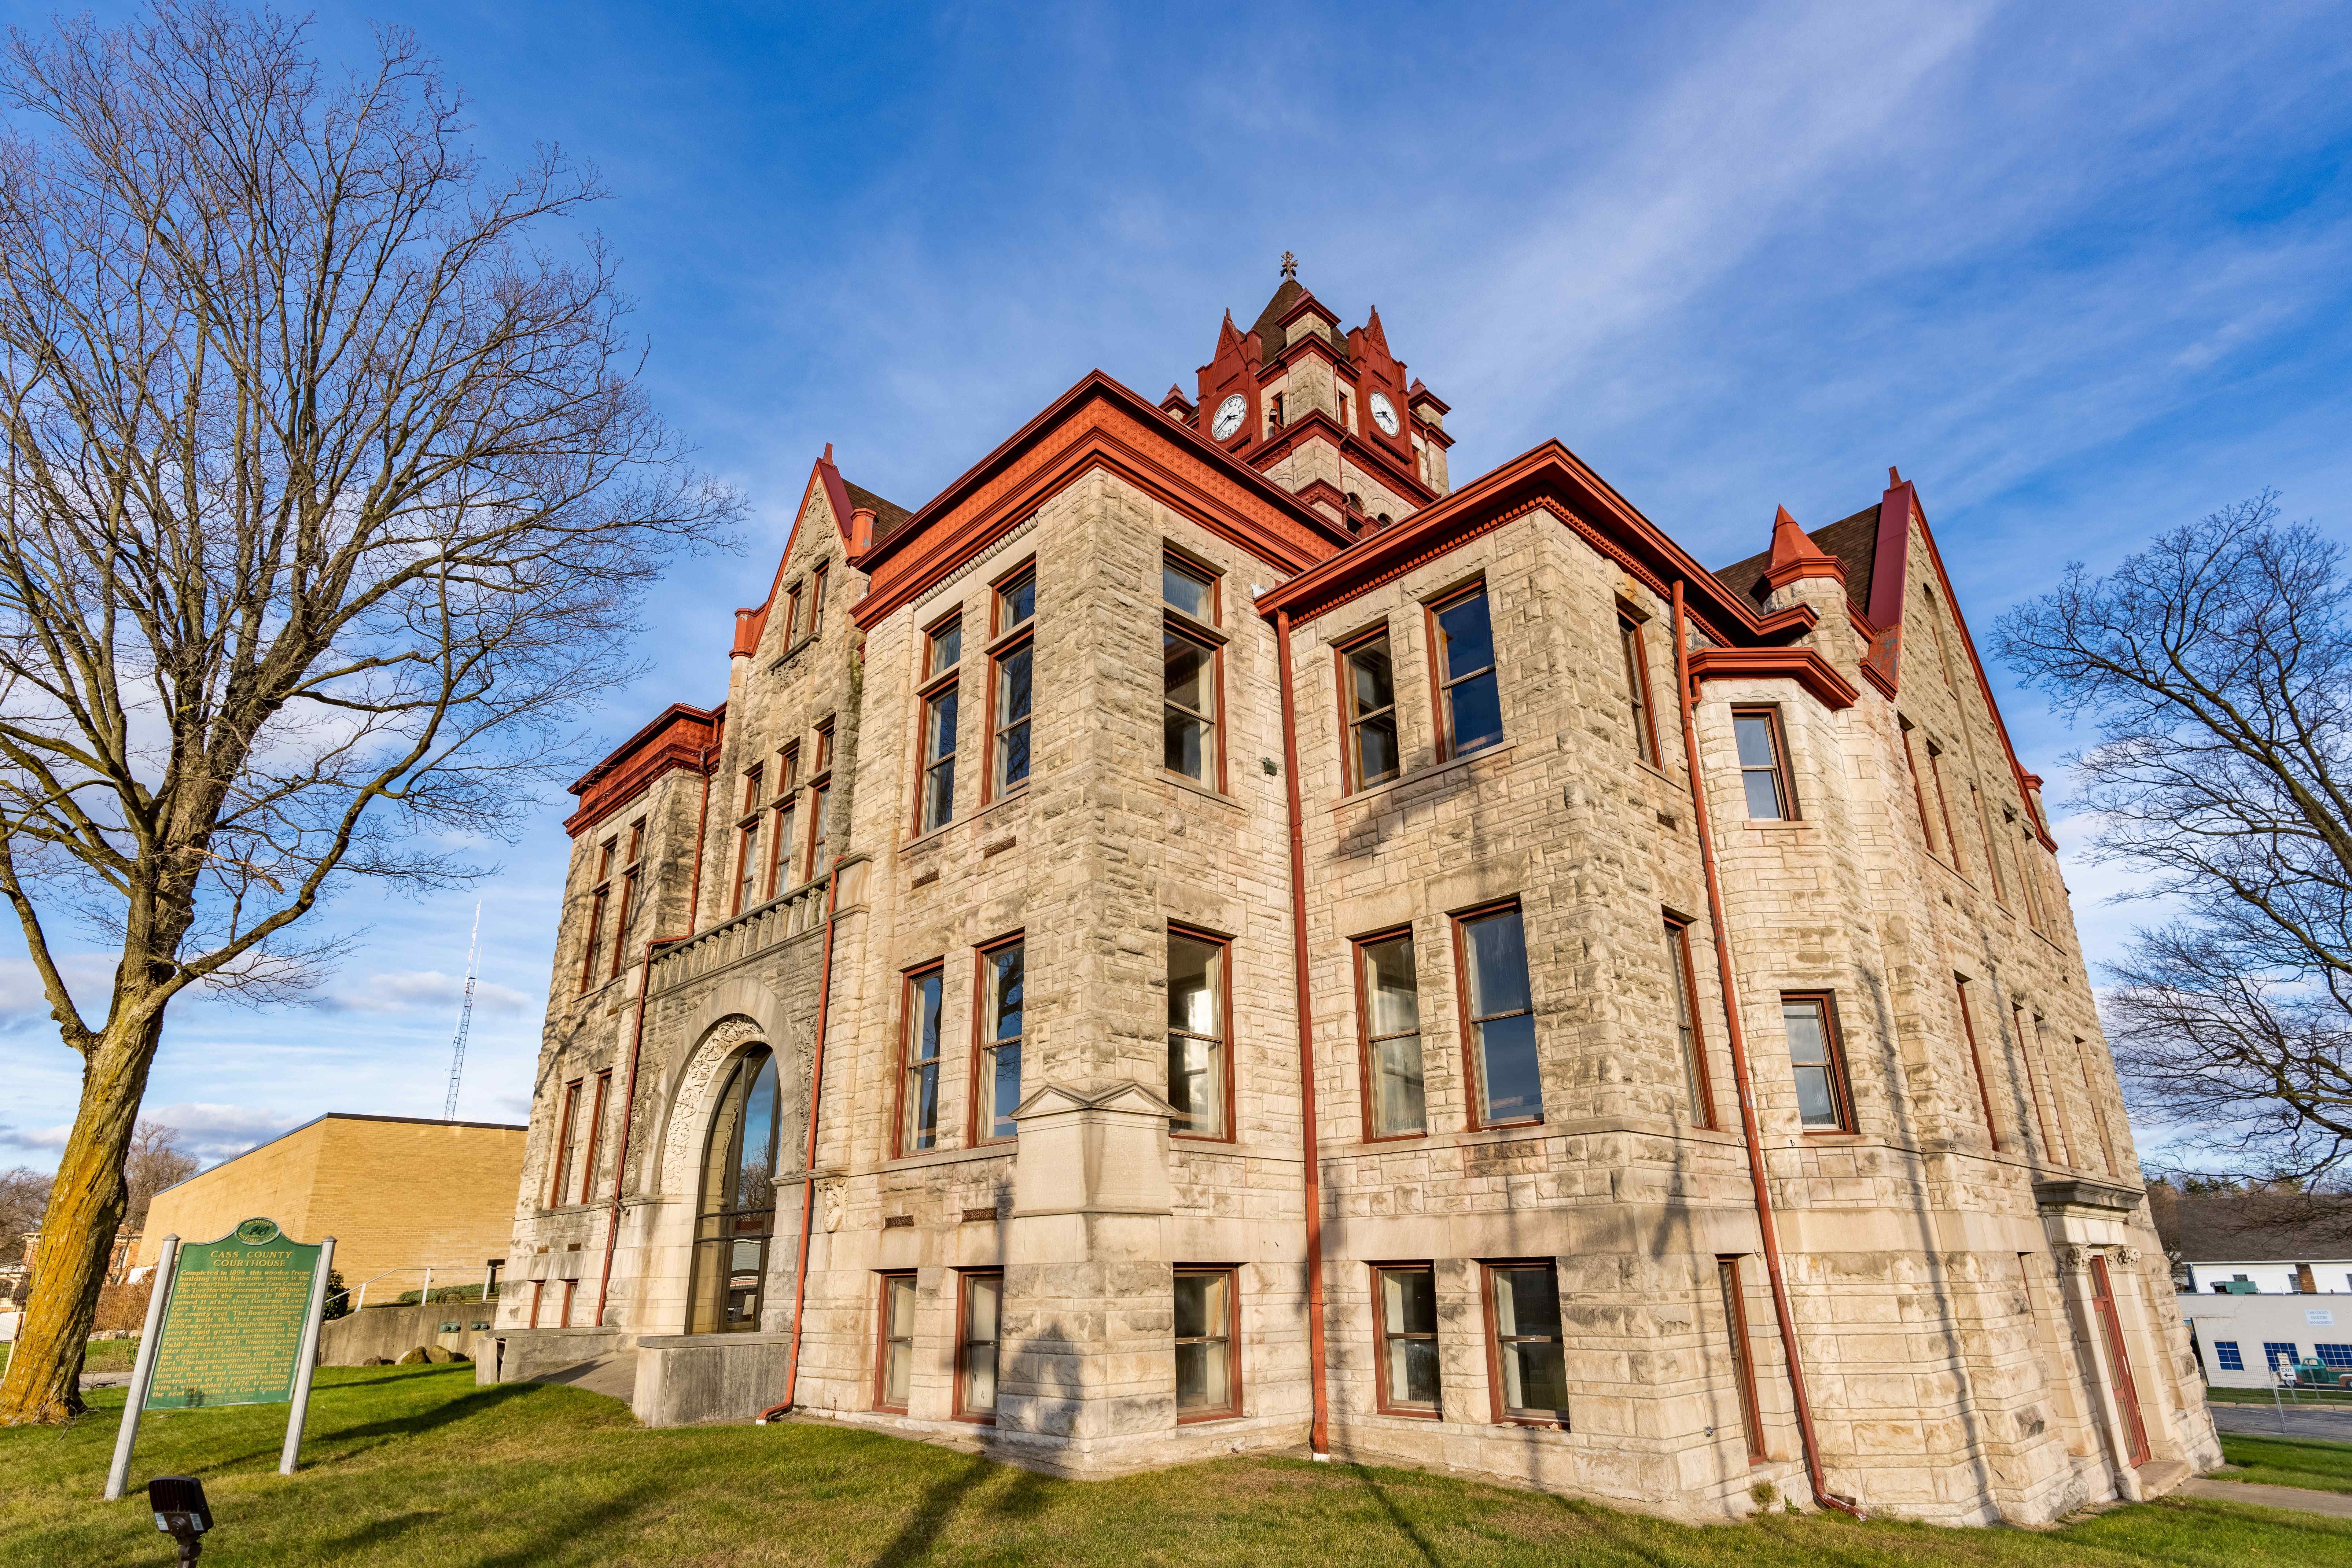 Built in 1899, the Cass County Courthouse is a source of pride for the community. The structure is poised for renovation.